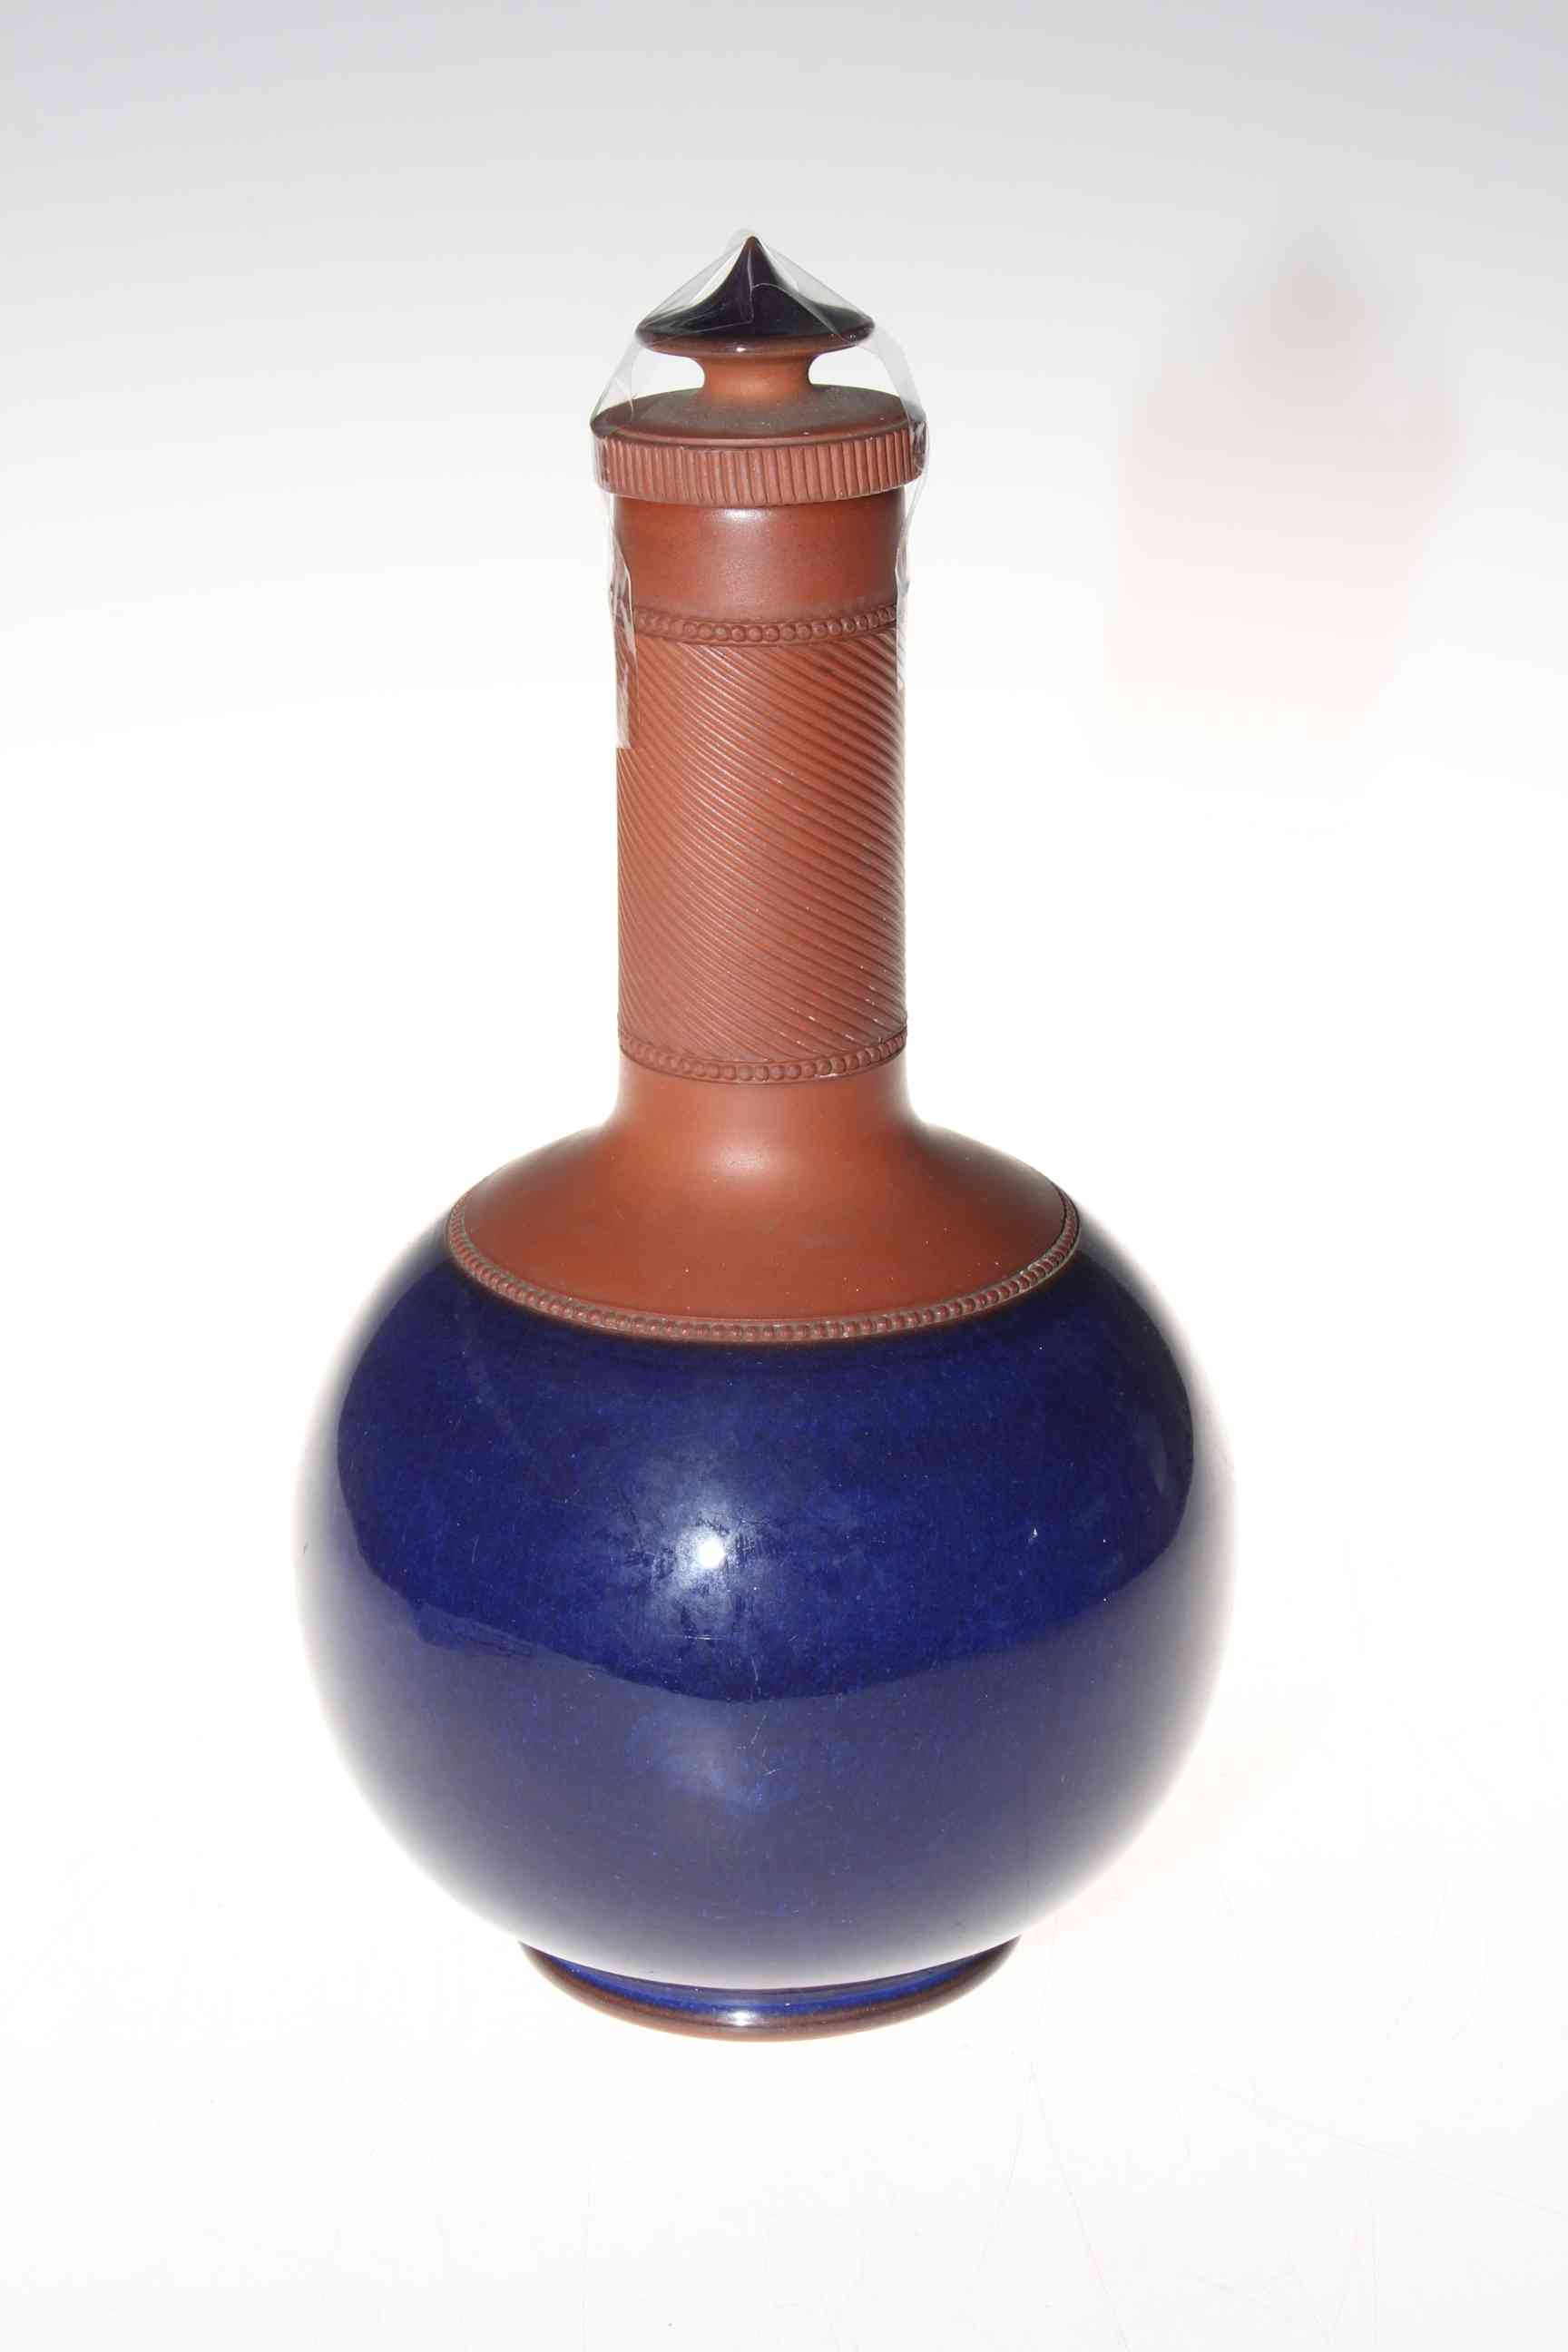 Part glazed red ware bottle vase and cover.